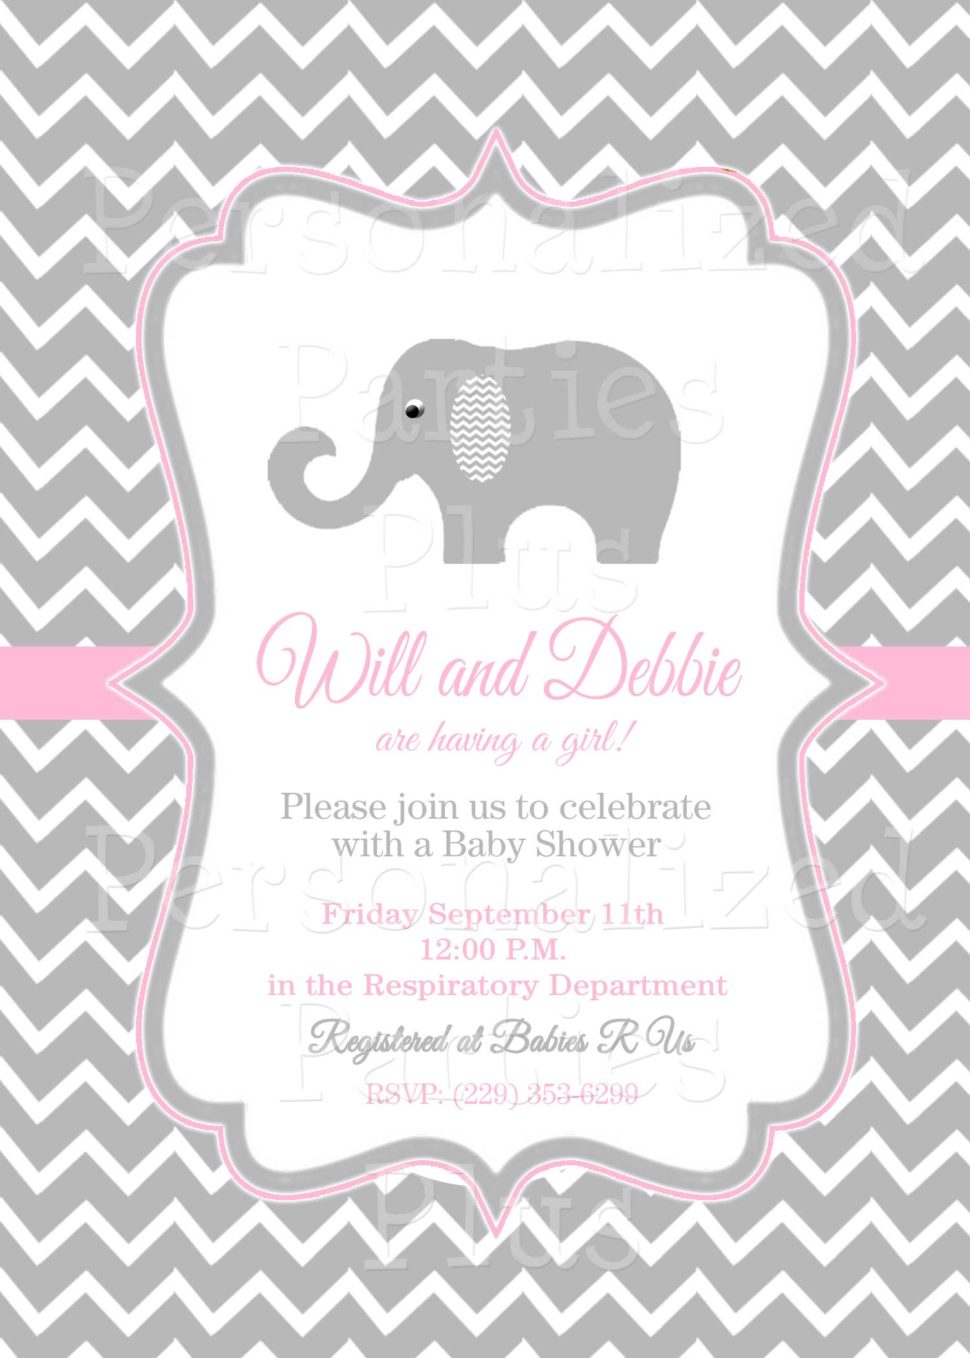 Medium Size of Baby Shower:inspirational Elephant Baby Shower Invitations Photo Concepts Baby Shower Party Favors Baby Shower Tea Baby Shower Templates Indian Baby Shower